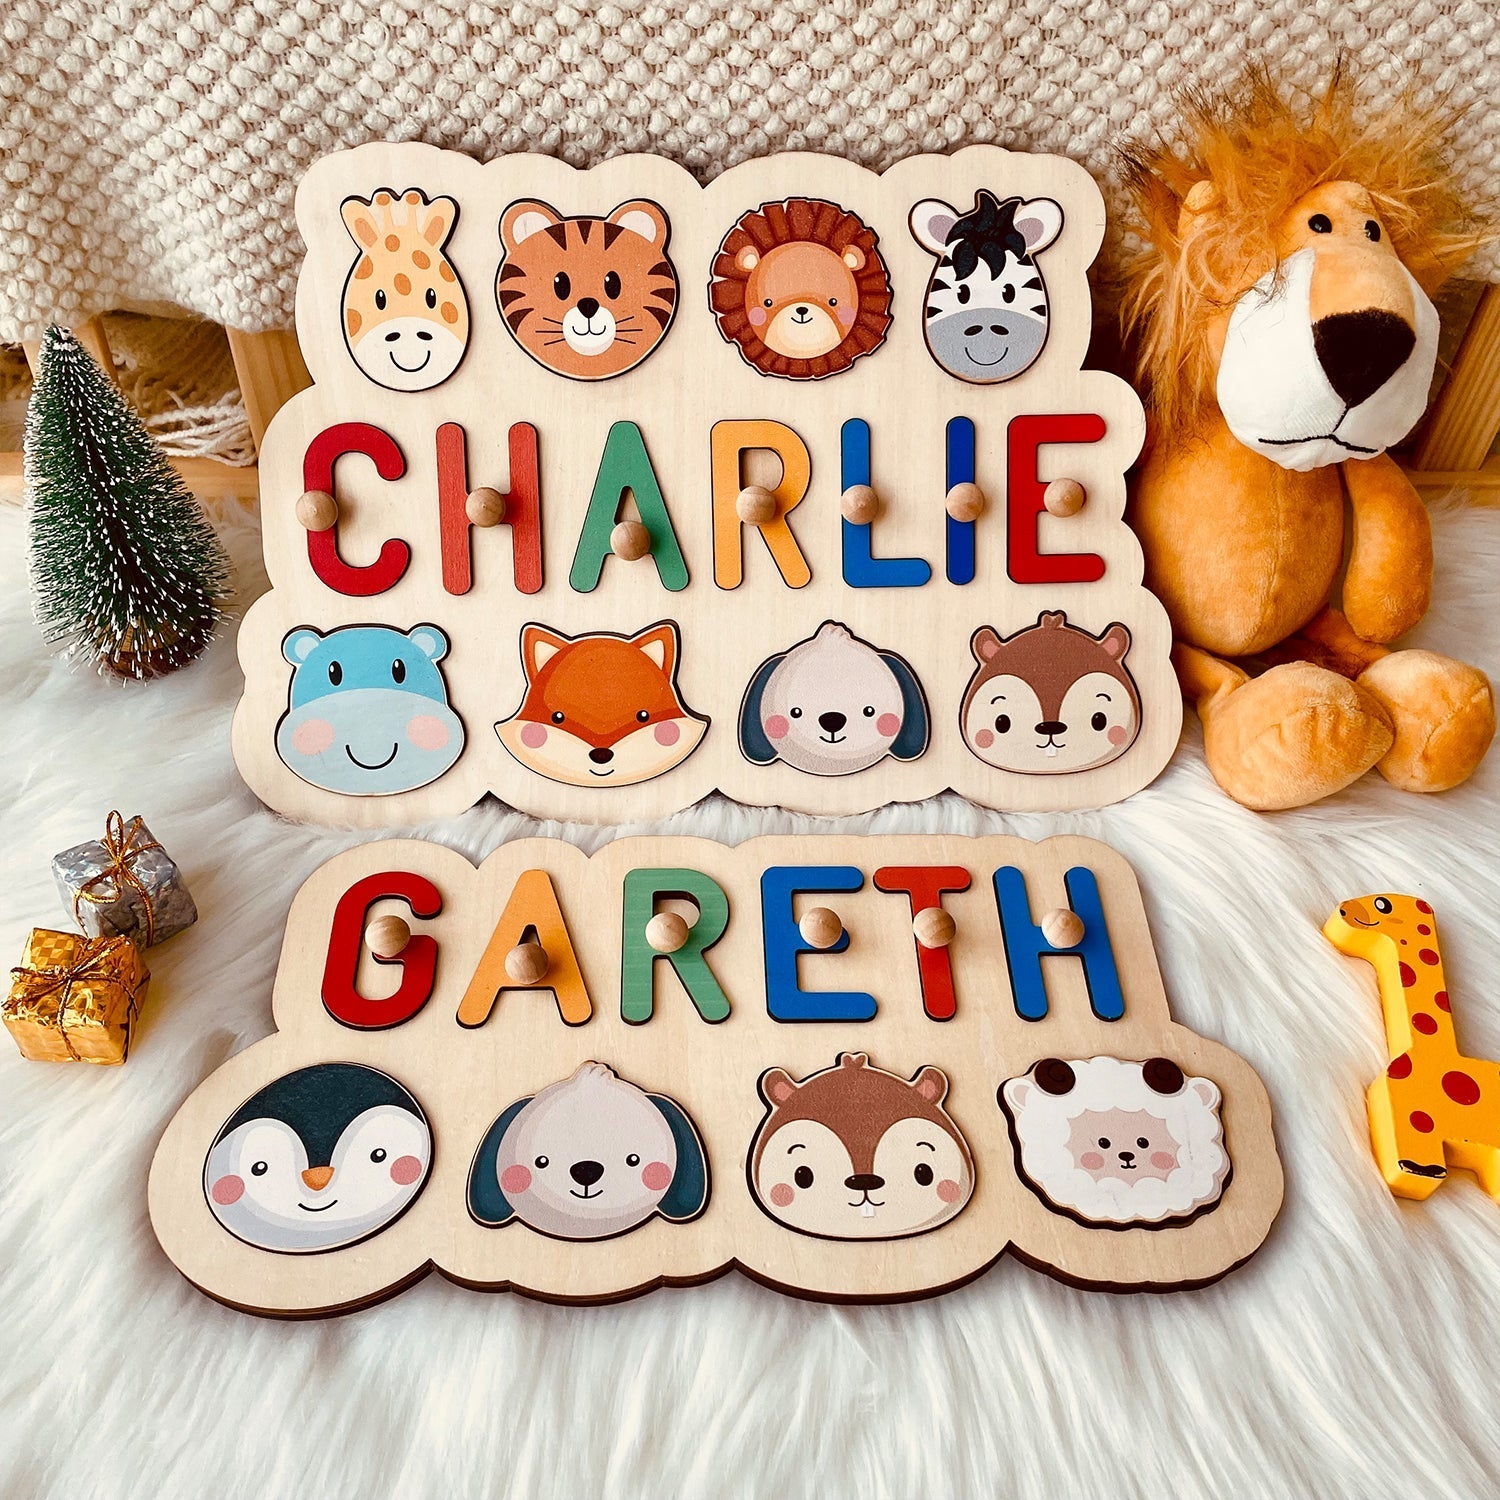 Name Puzzle “CHARLIE” And “GARETH”